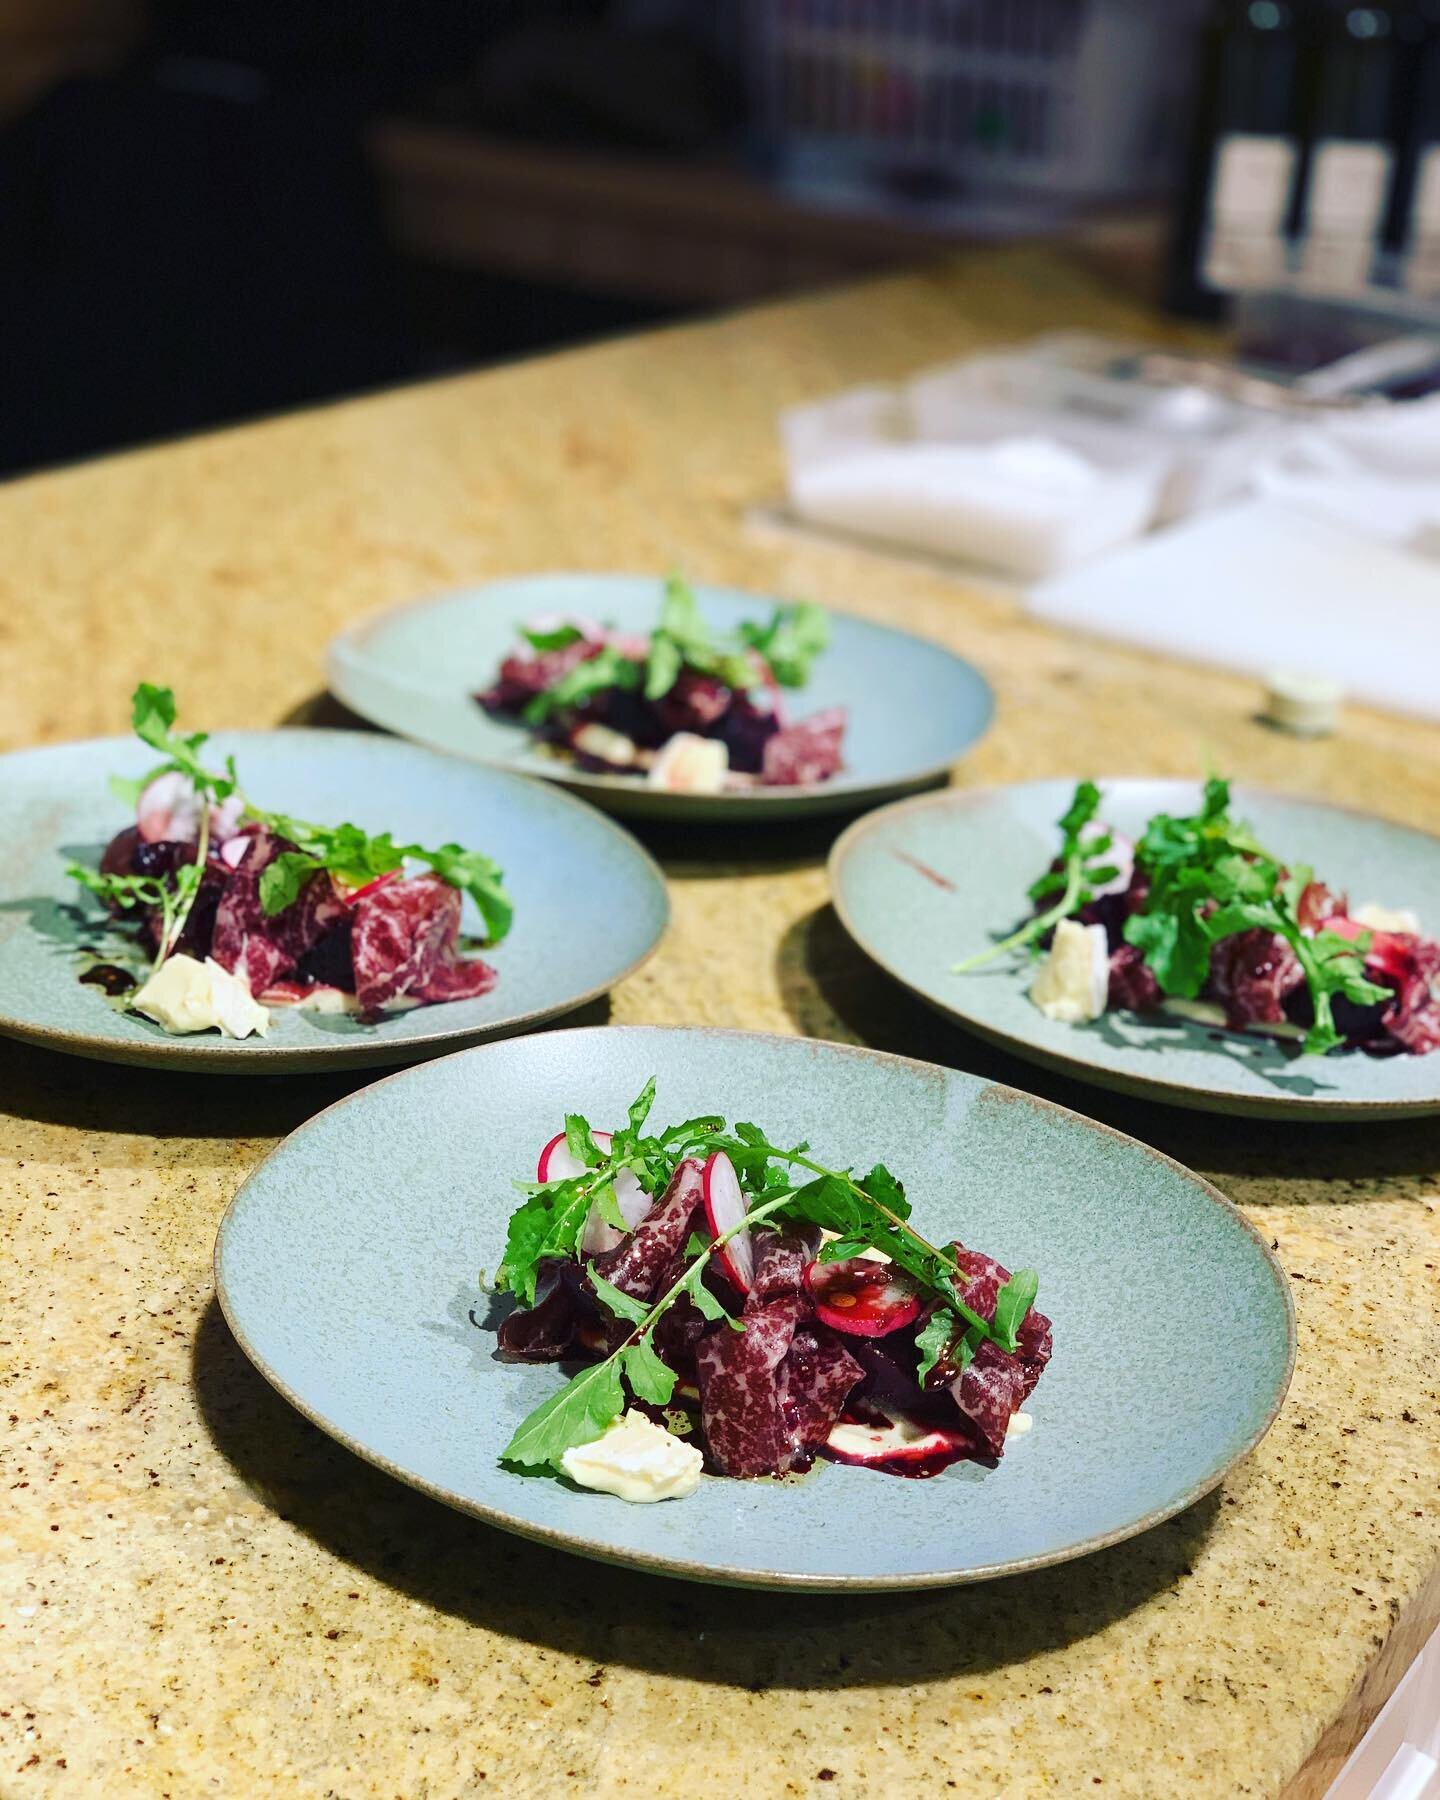 A small salad of beetroot, French Brie, wagyu bresaola with rocket from my garden . First course of five from Saturday night...
.
.
.
#salad #food #foodphotography #privatechef #sydneyfood #sydneyfoodie #chefsofinstagram #foodiesofinstagram